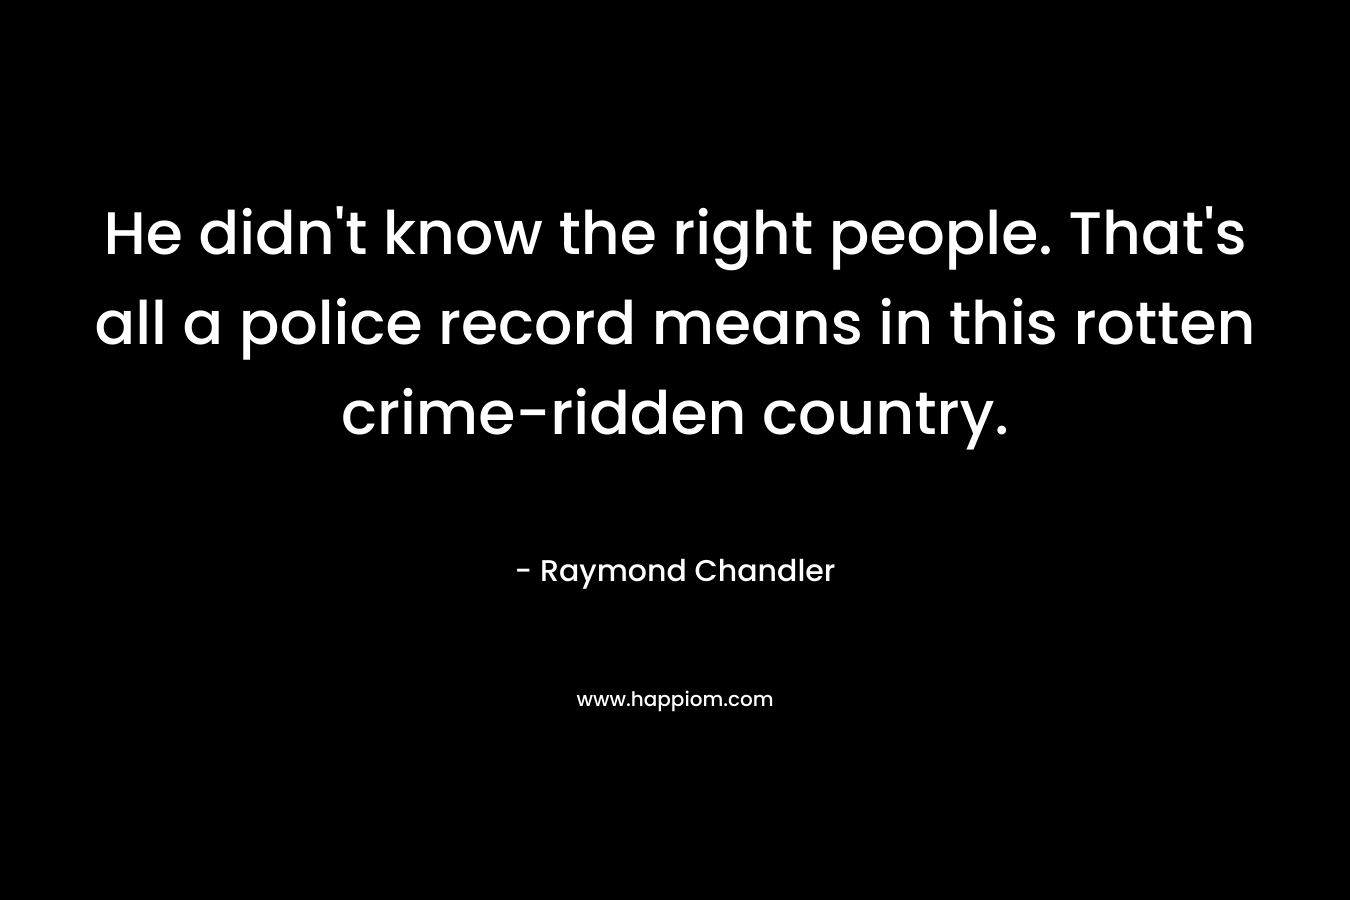 He didn’t know the right people. That’s all a police record means in this rotten crime-ridden country. – Raymond Chandler